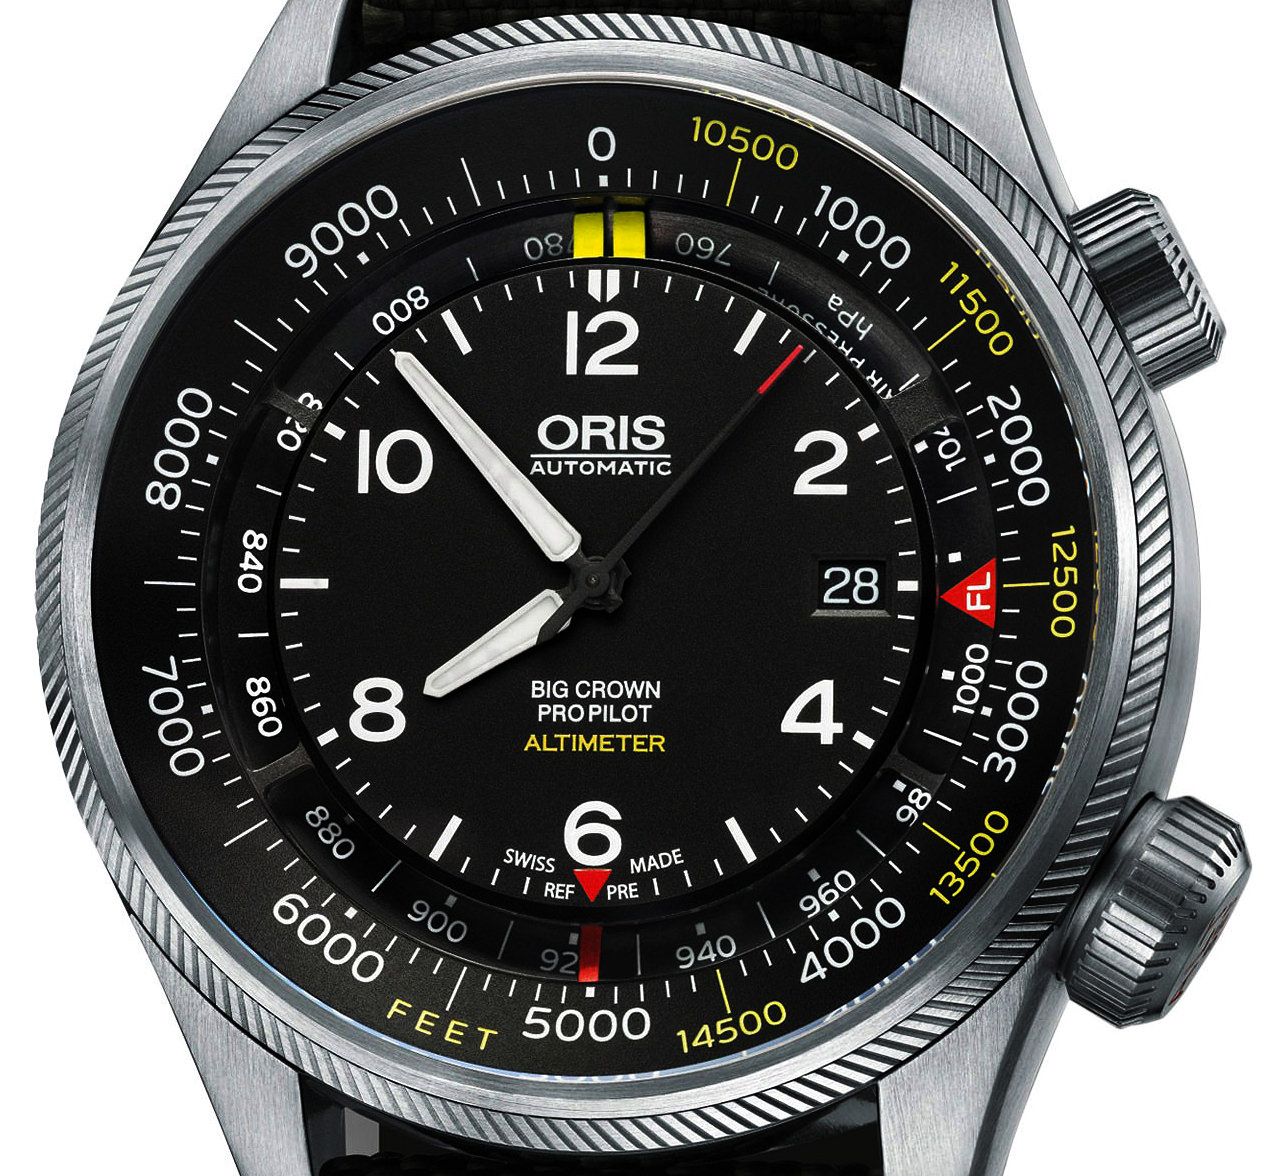 Oris Big Crown ProPilot Altimeter- In-depth Review by The Watch Guide